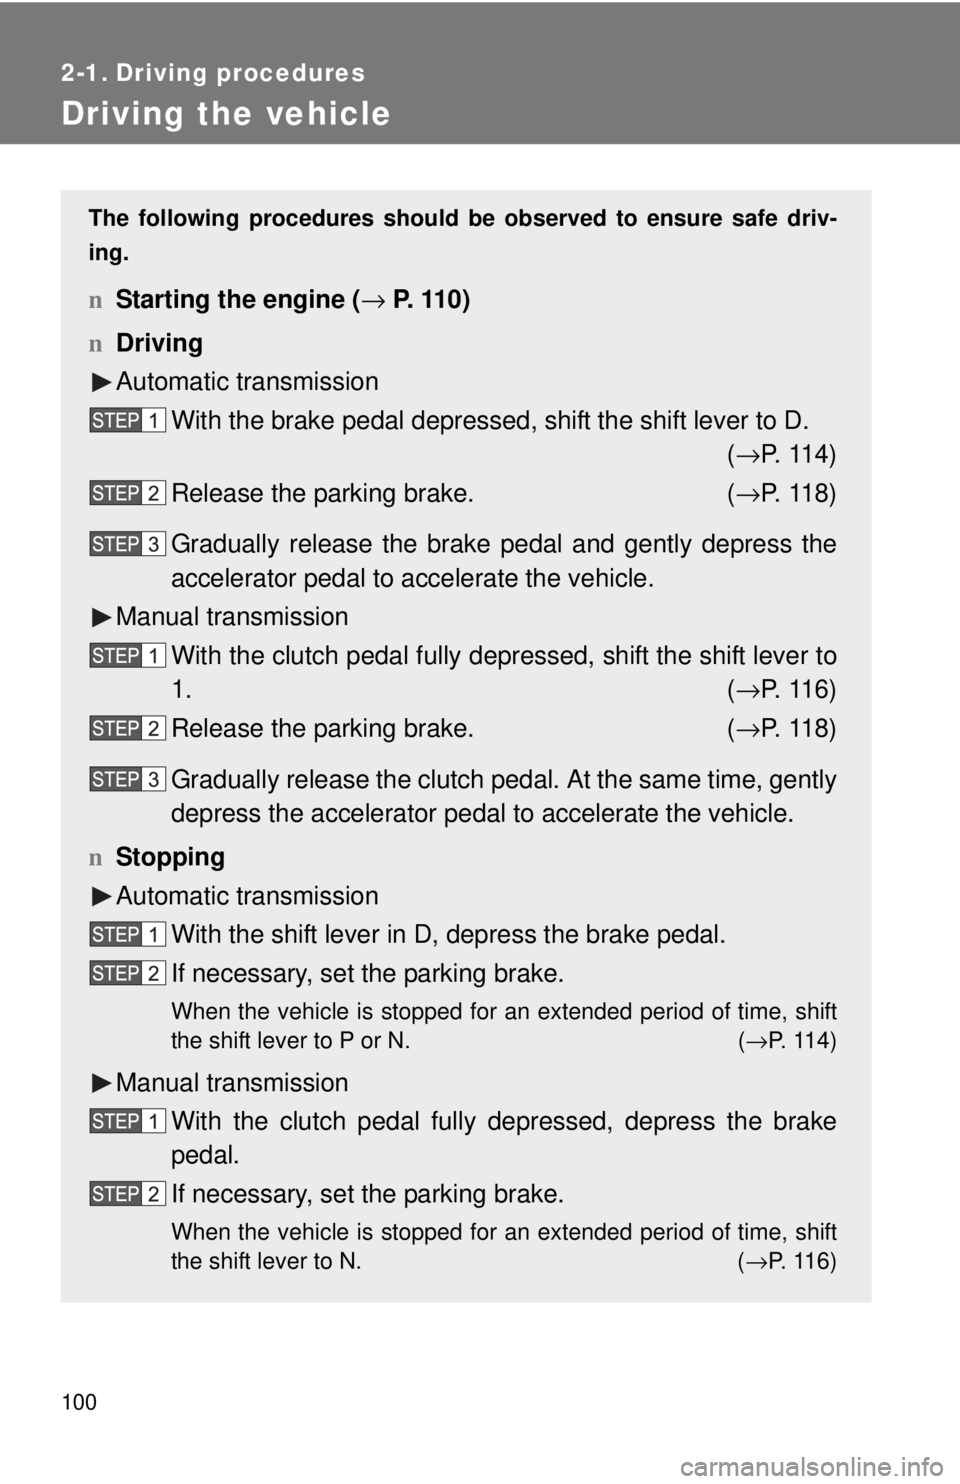 TOYOTA YARIS SEDAN 2010  Owners Manual 100
2-1. Driving procedures
Driving the vehicle
The following procedures should be observed to ensure safe driv-
ing.
n Starting the engine ( → P. 110)
n Driving
Automatic transmission
With the brak